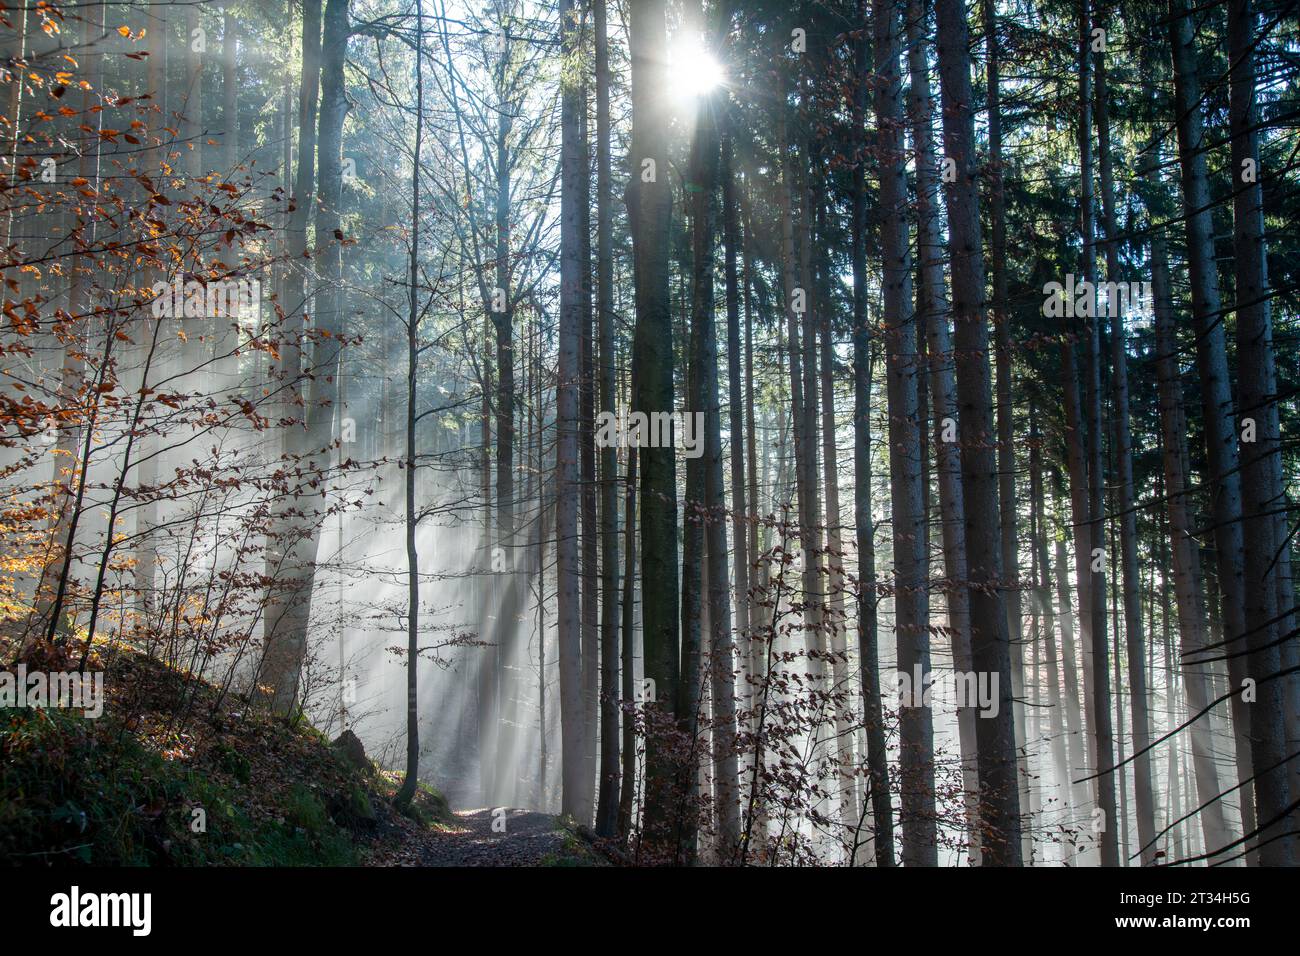 A forest with trees, fog and backlight Stock Photo